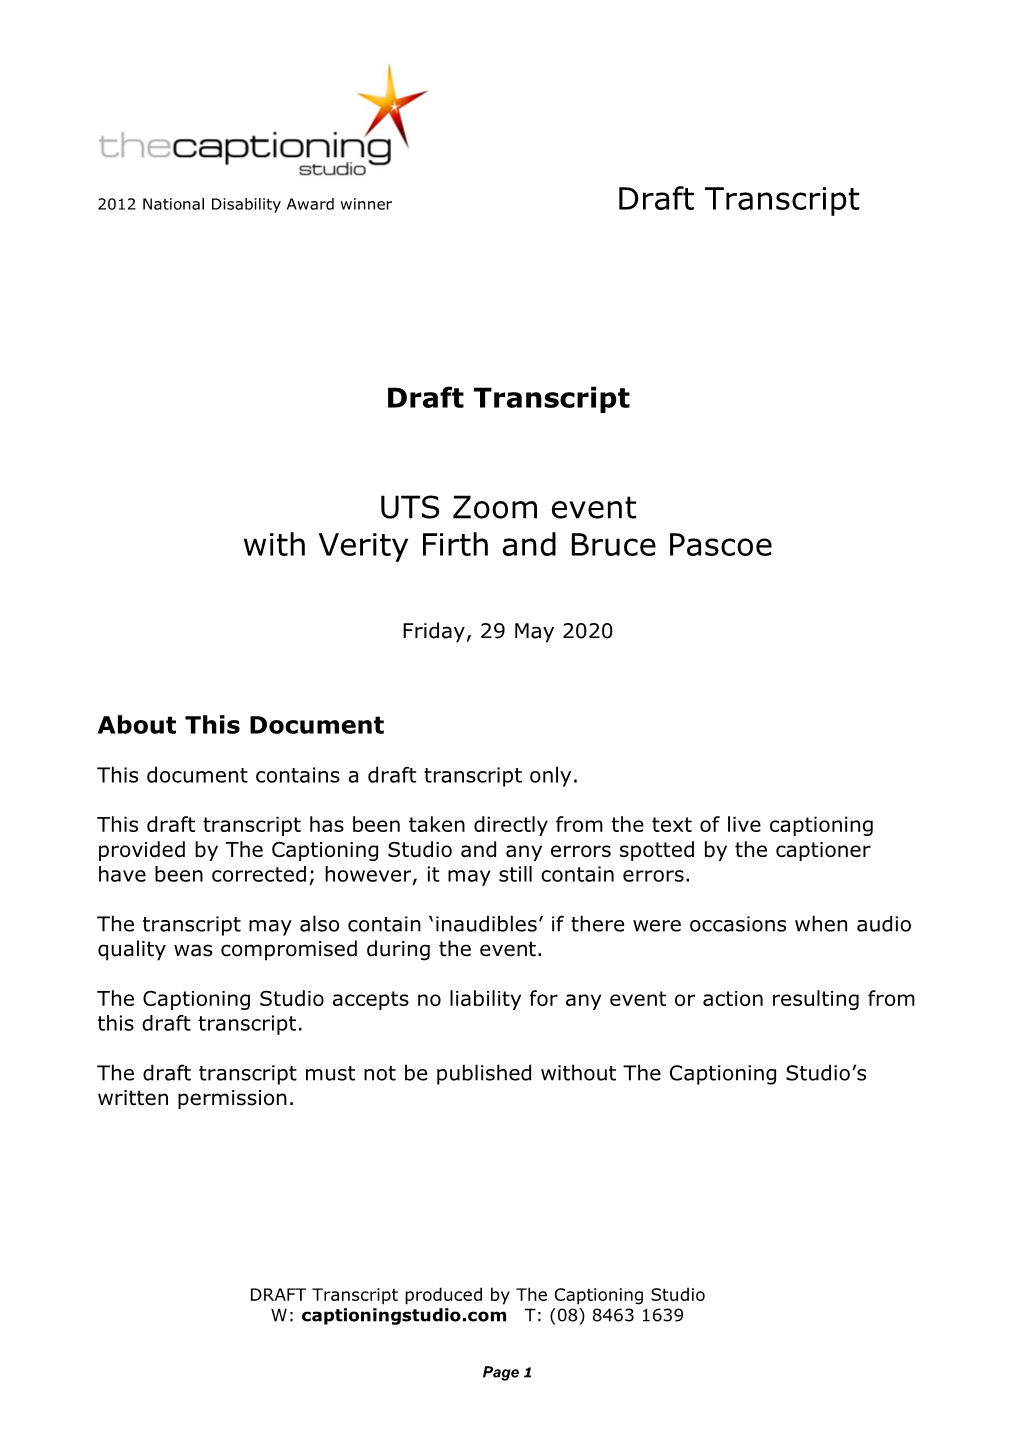 Draft Transcript UTS Zoom Event with Verity Firth and Bruce Pascoe